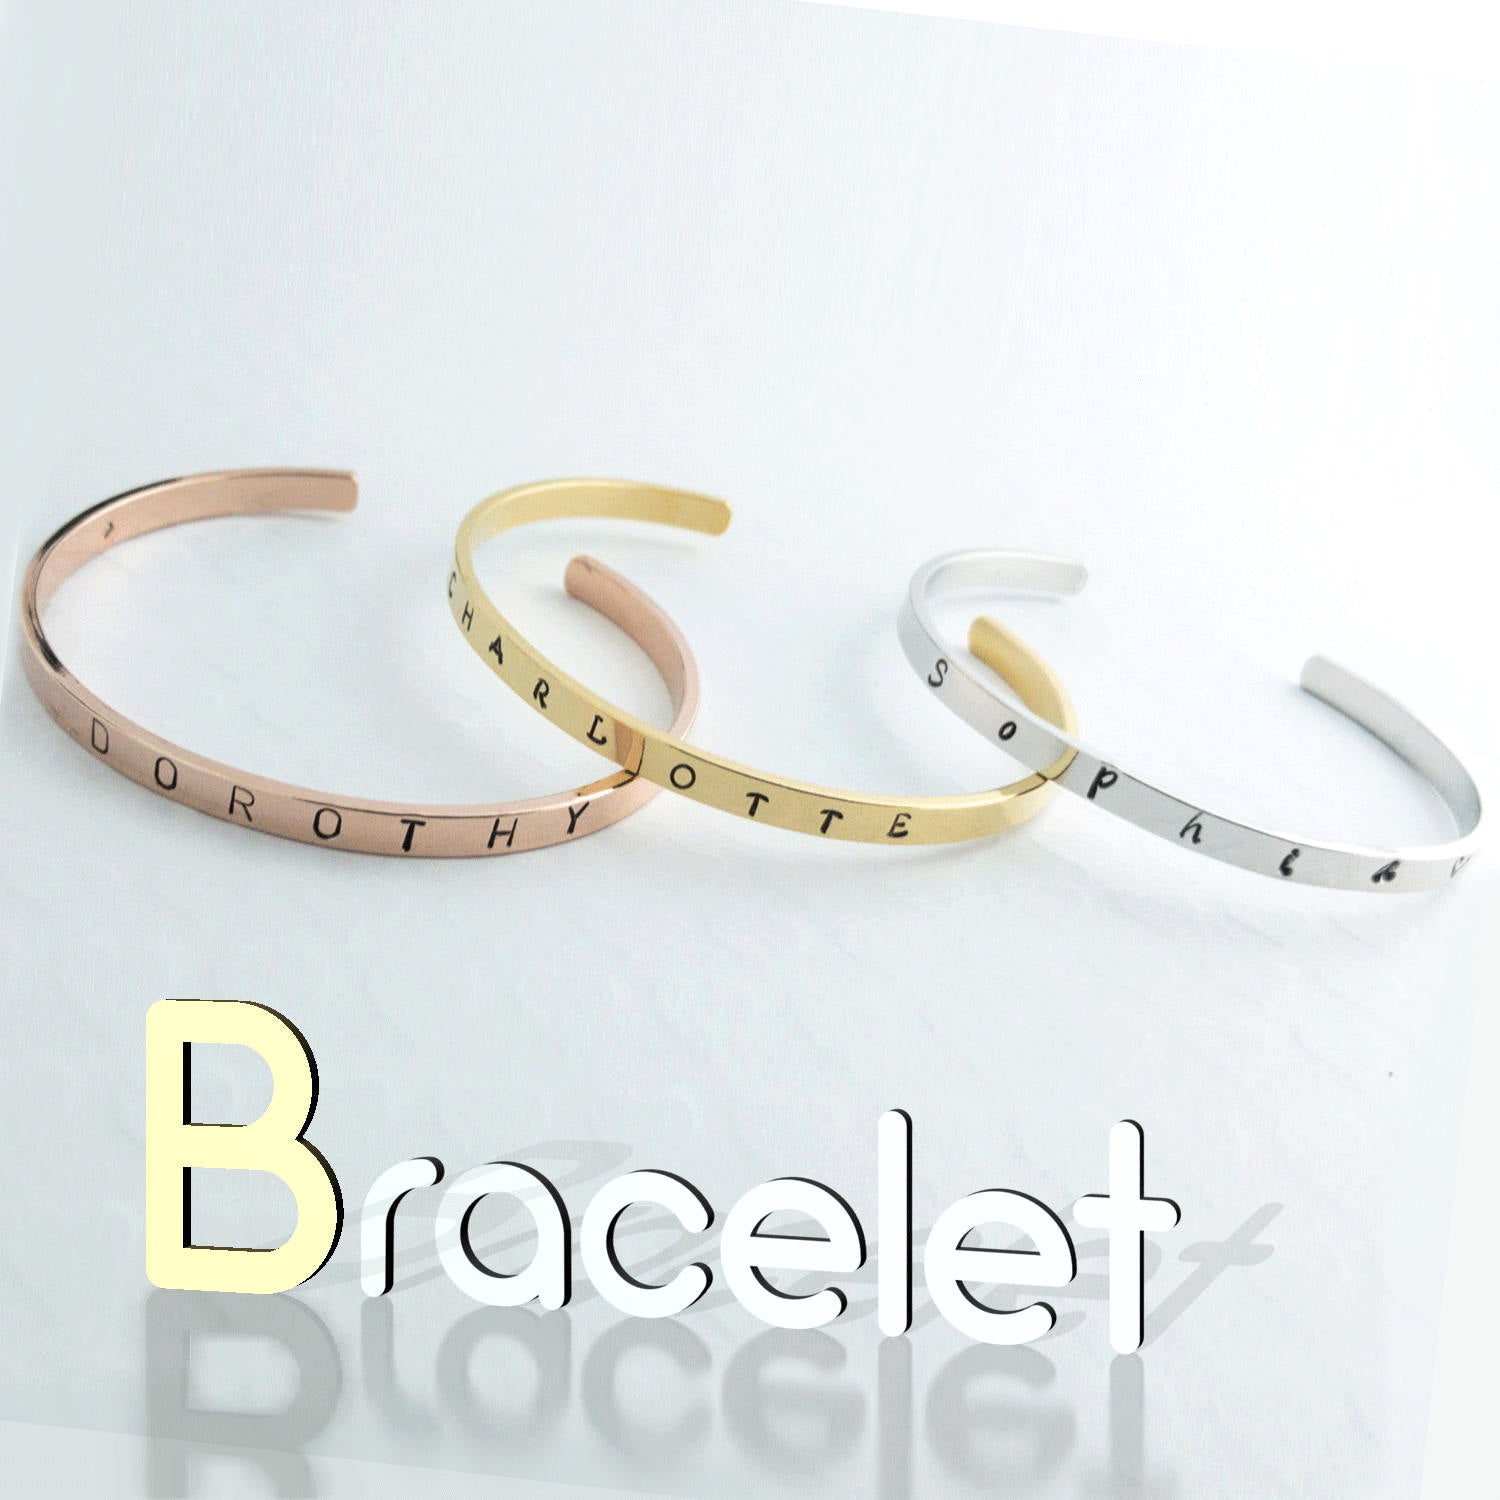 Buy Personalized Cuff Bracelets at Petite Boutique - Custom 16K Gold, Silver, Rose Gold Jewelry